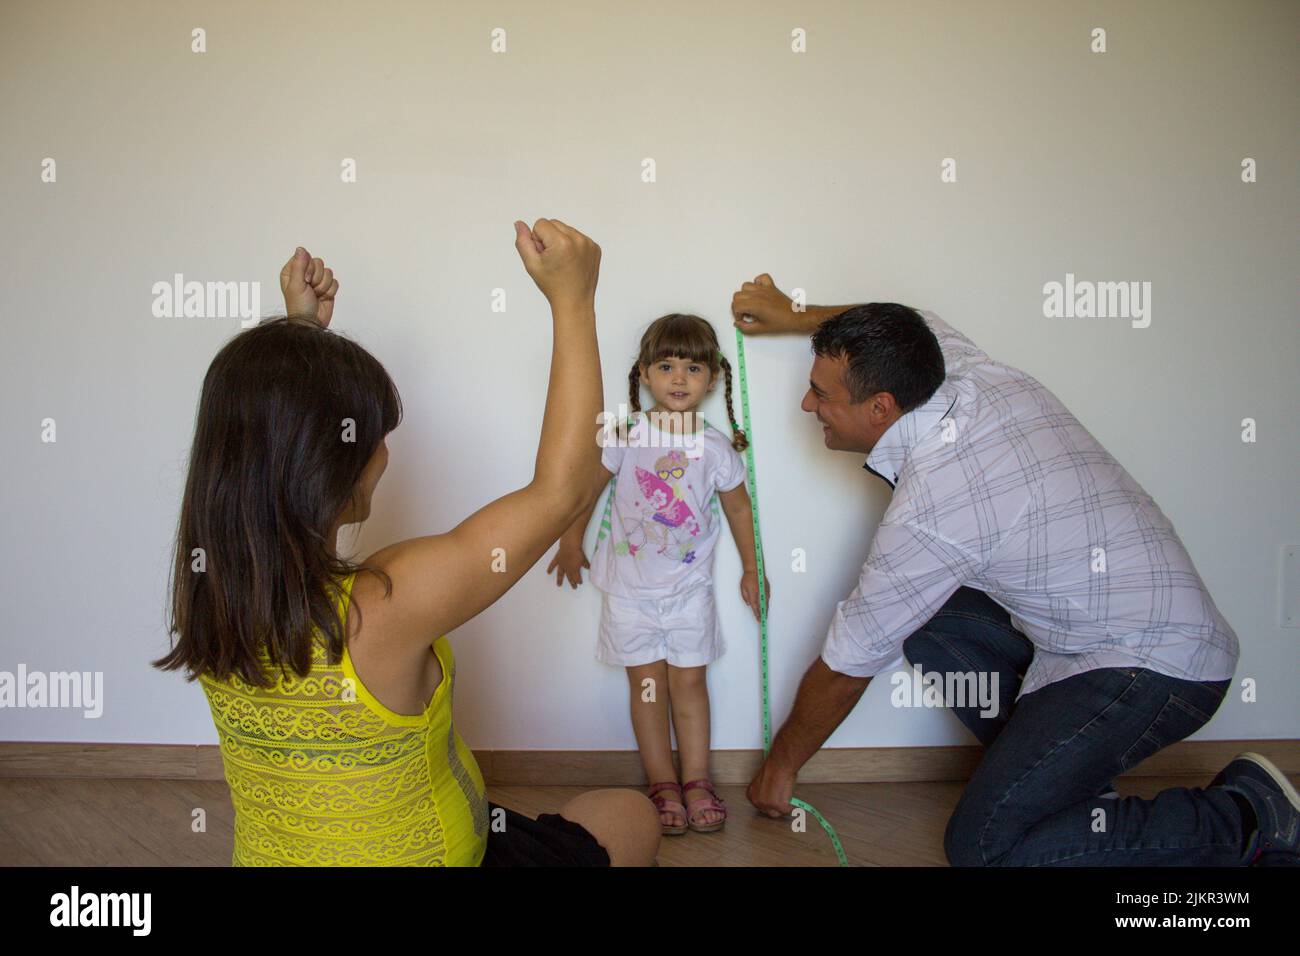 Photo of a dad who measures the height of his daughter with a tape measure while the mother rejoices at the progress achieved. Image of a happy family Stock Photo